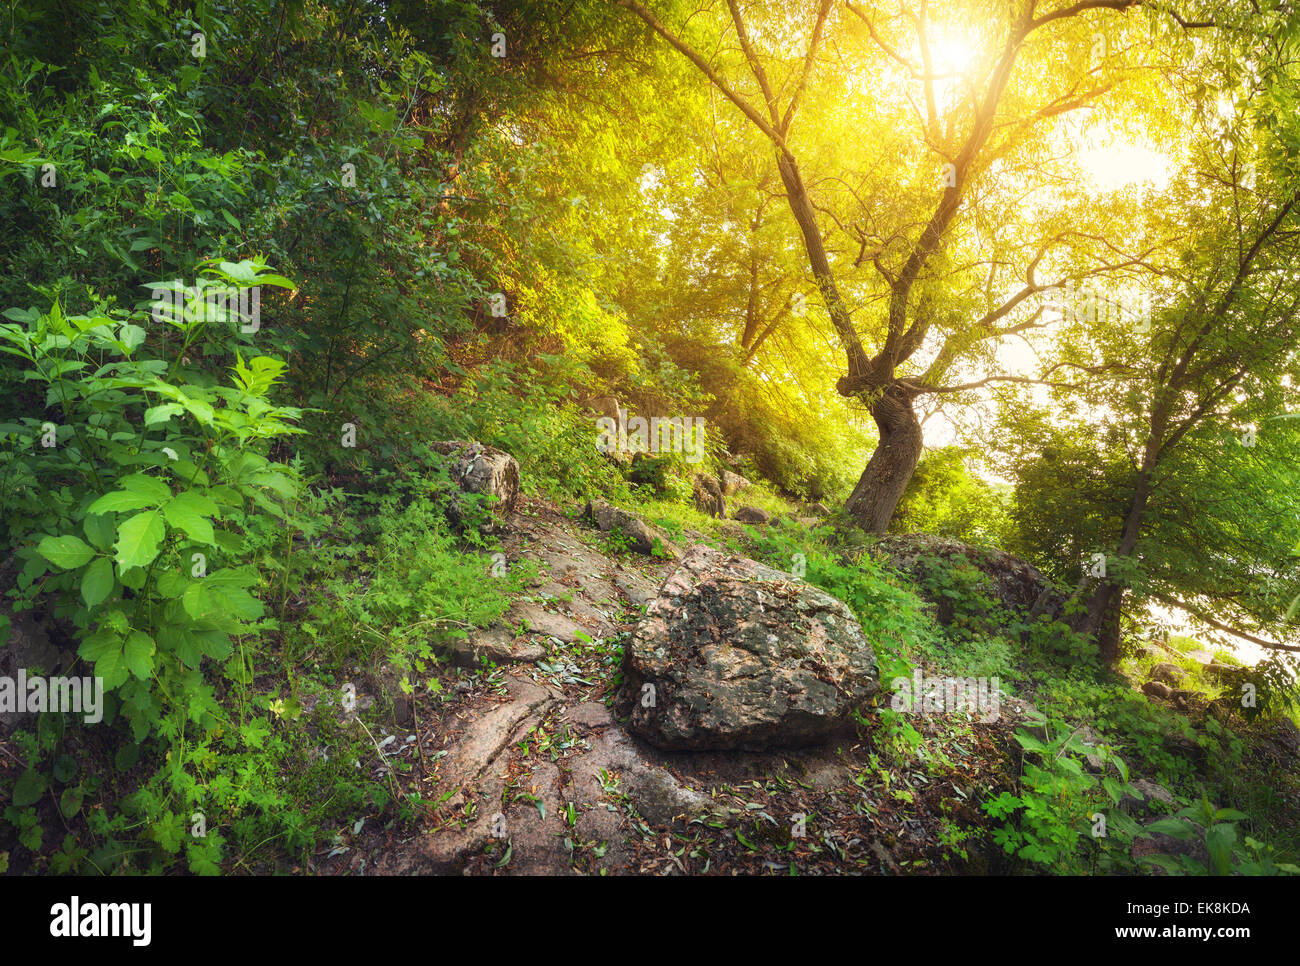 Summer sunset in the beautiful forest with green plants, trees, stones, trail and sun in Ukraine Stock Photo